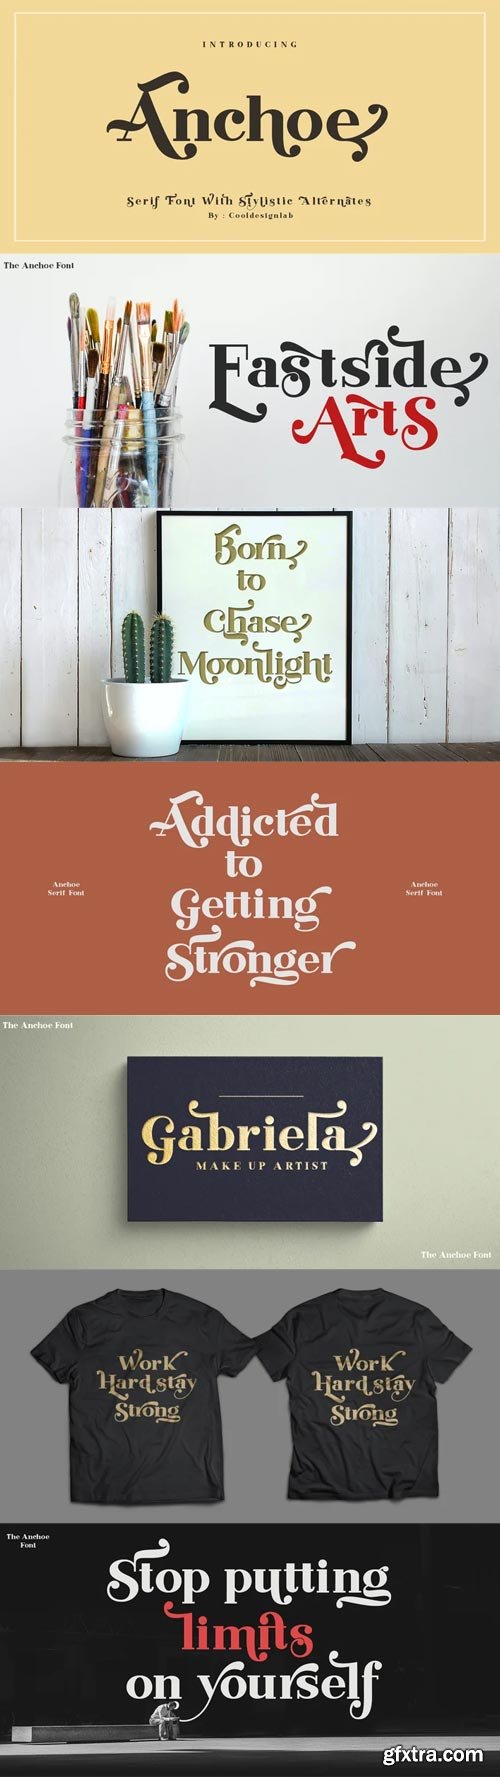 Anchoe Font